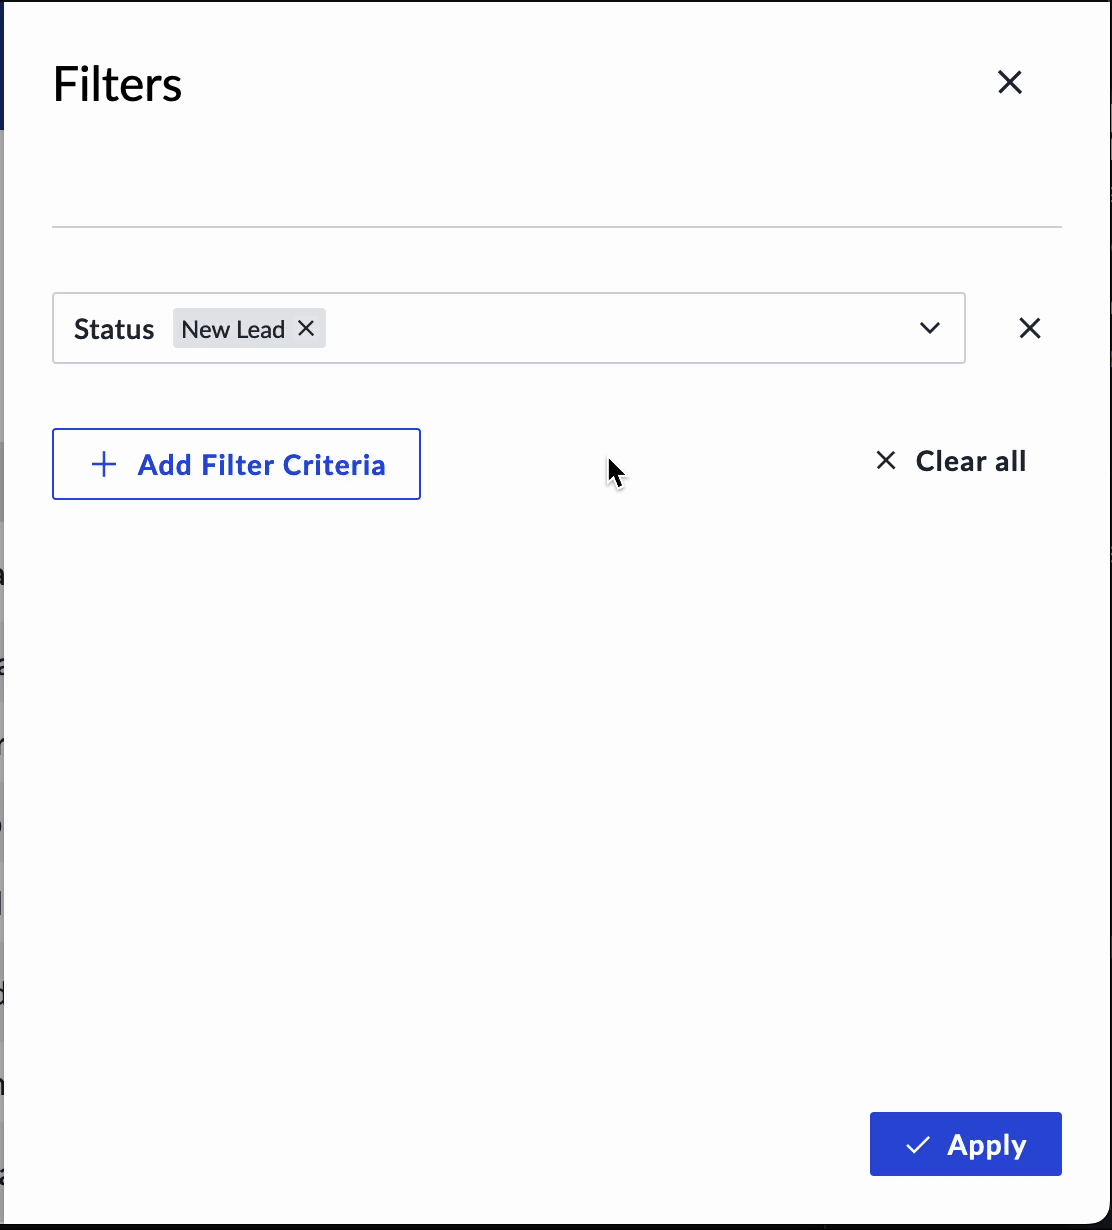 FilterContacts6